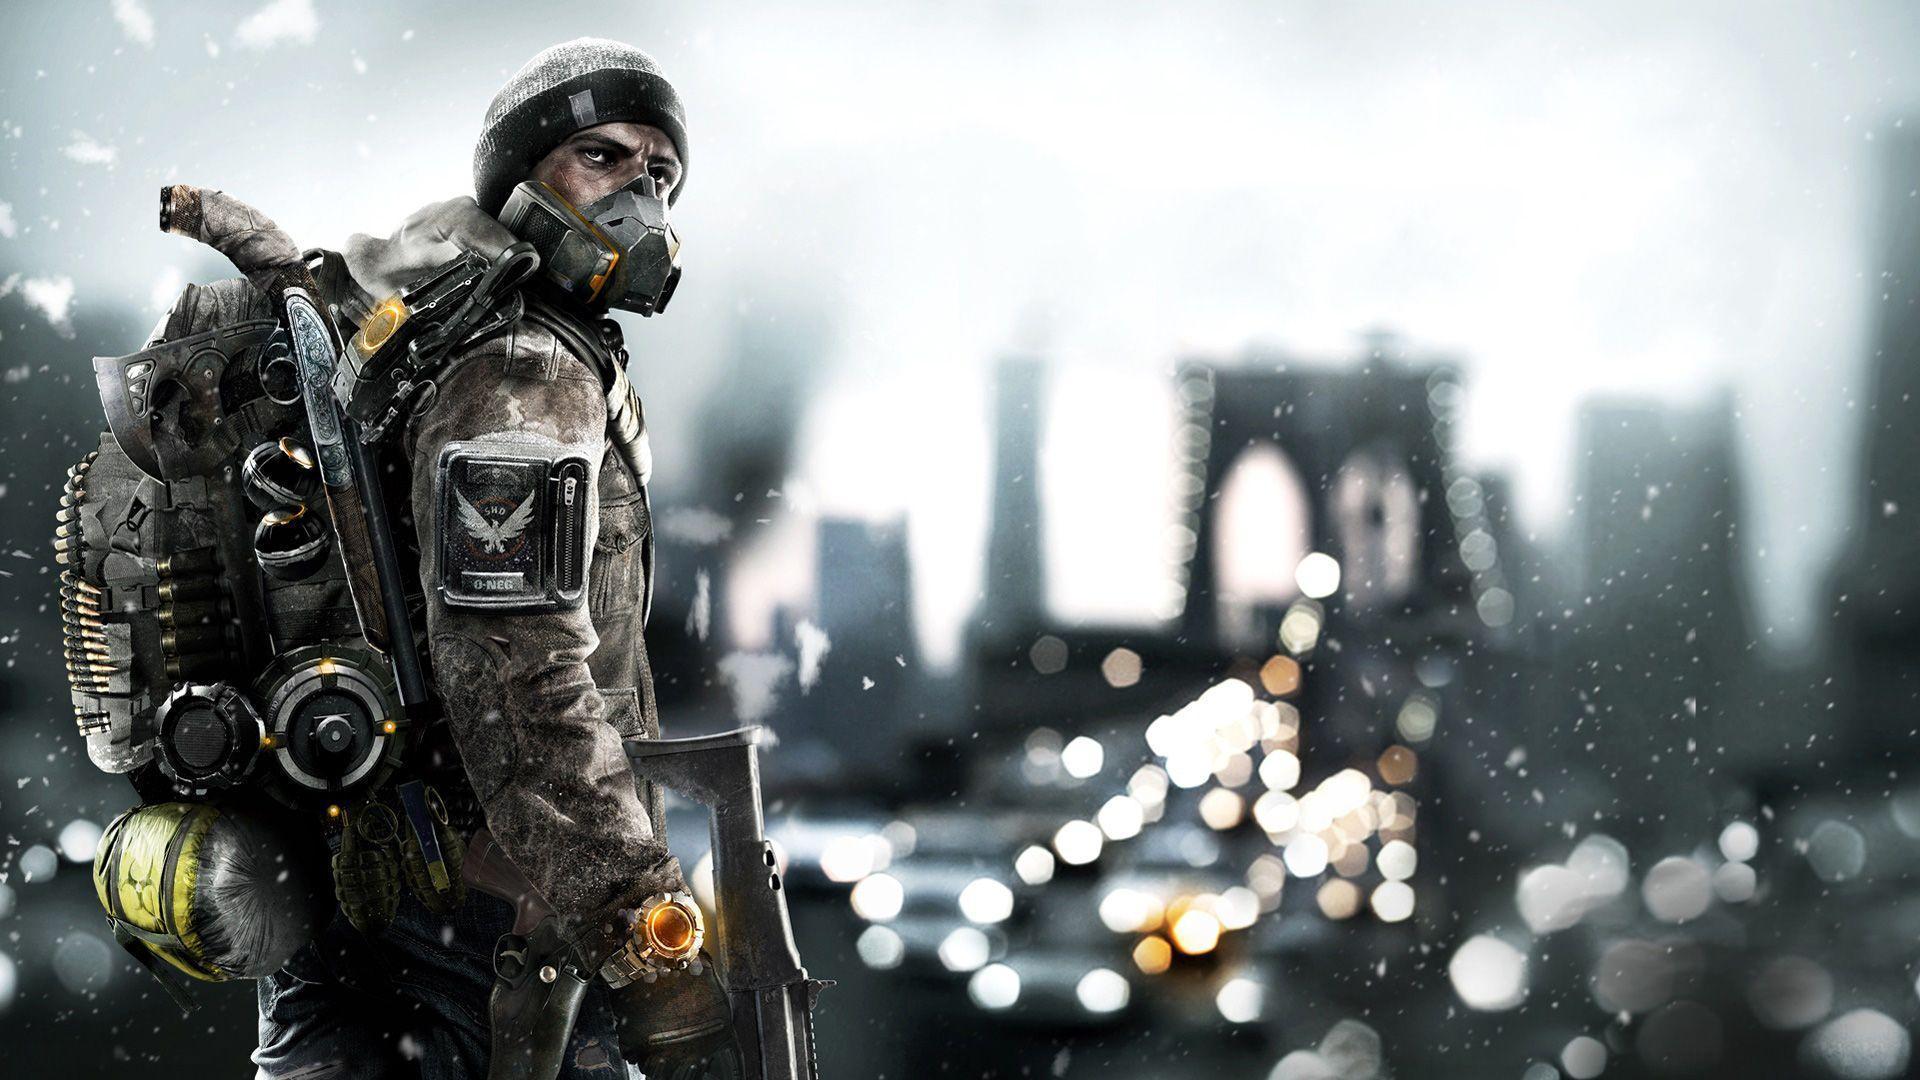 Tom Clancy&;s The Division Wallpaper HD